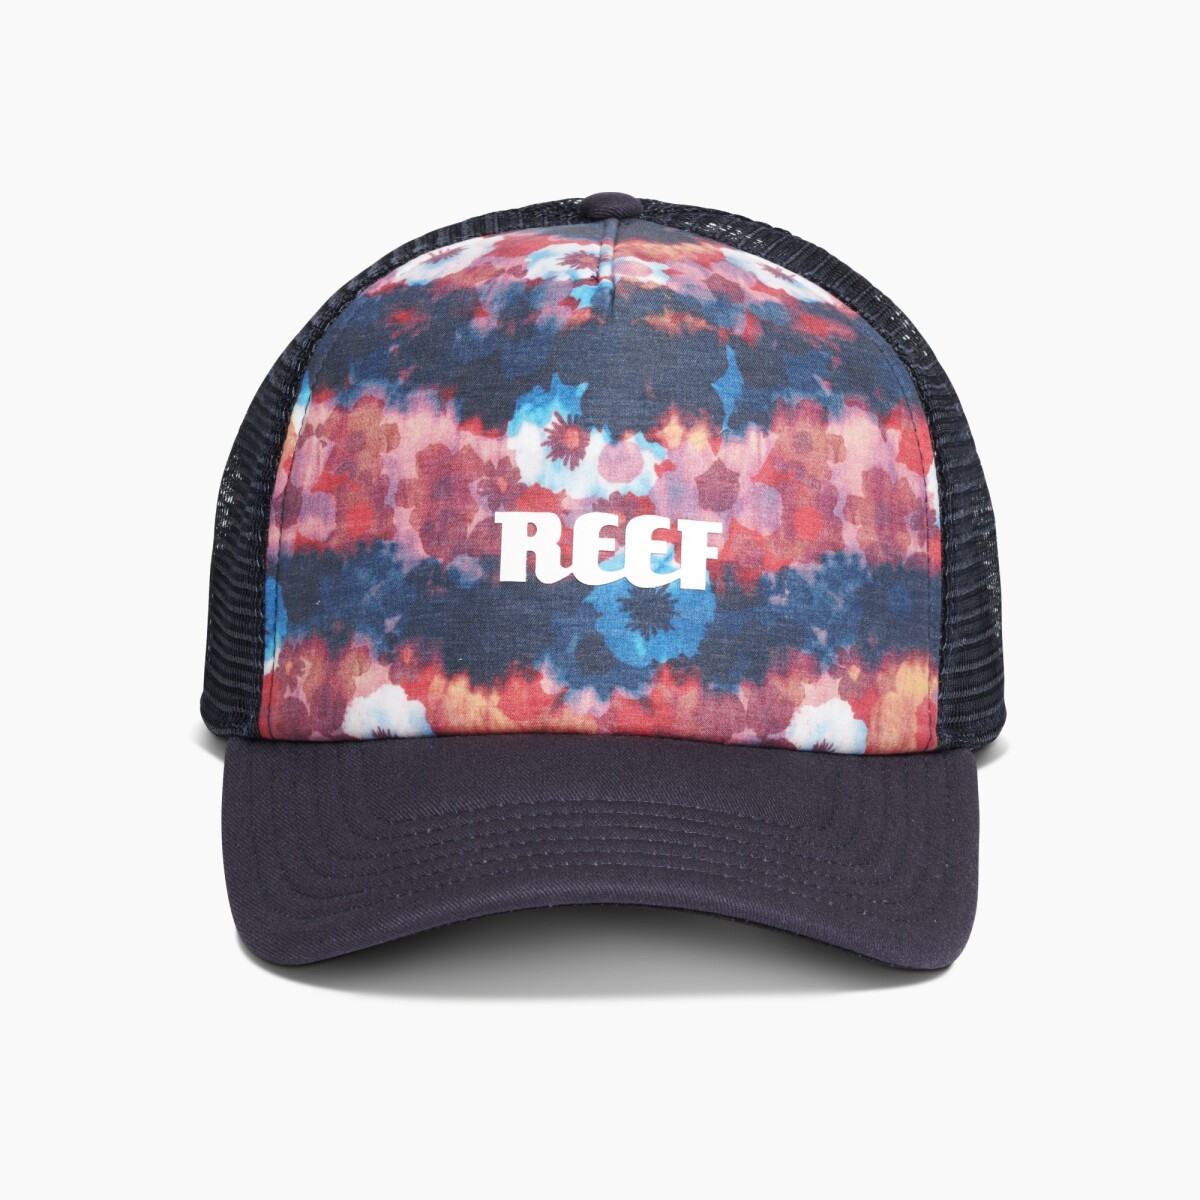 Gorro Reef 0A3OI5RED - RED/RED 